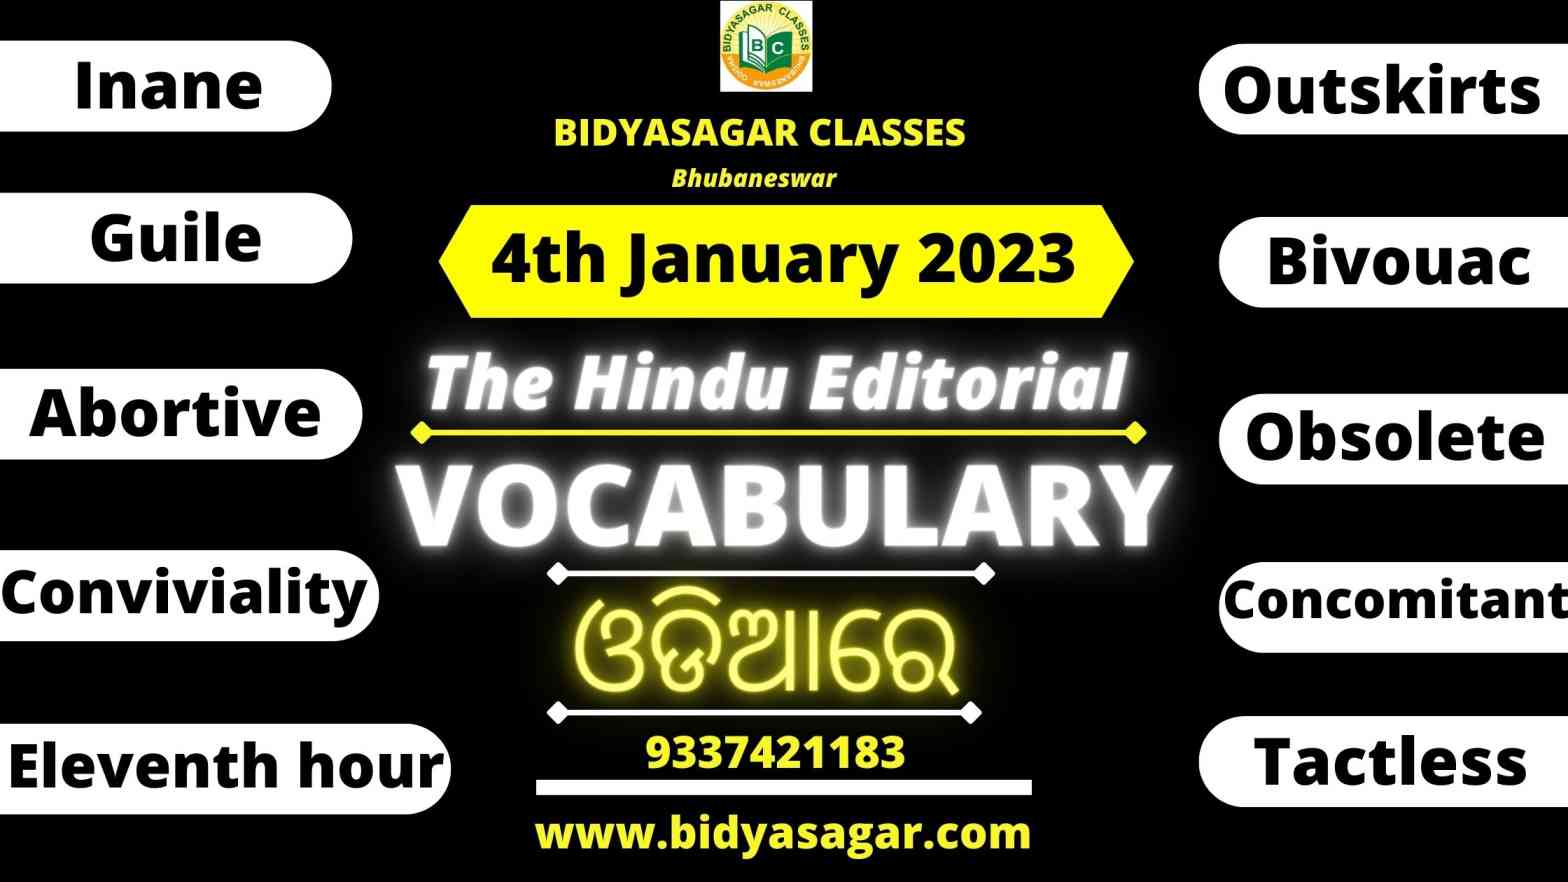 The Hindu Editorial Vocabulary of 4th January 2023